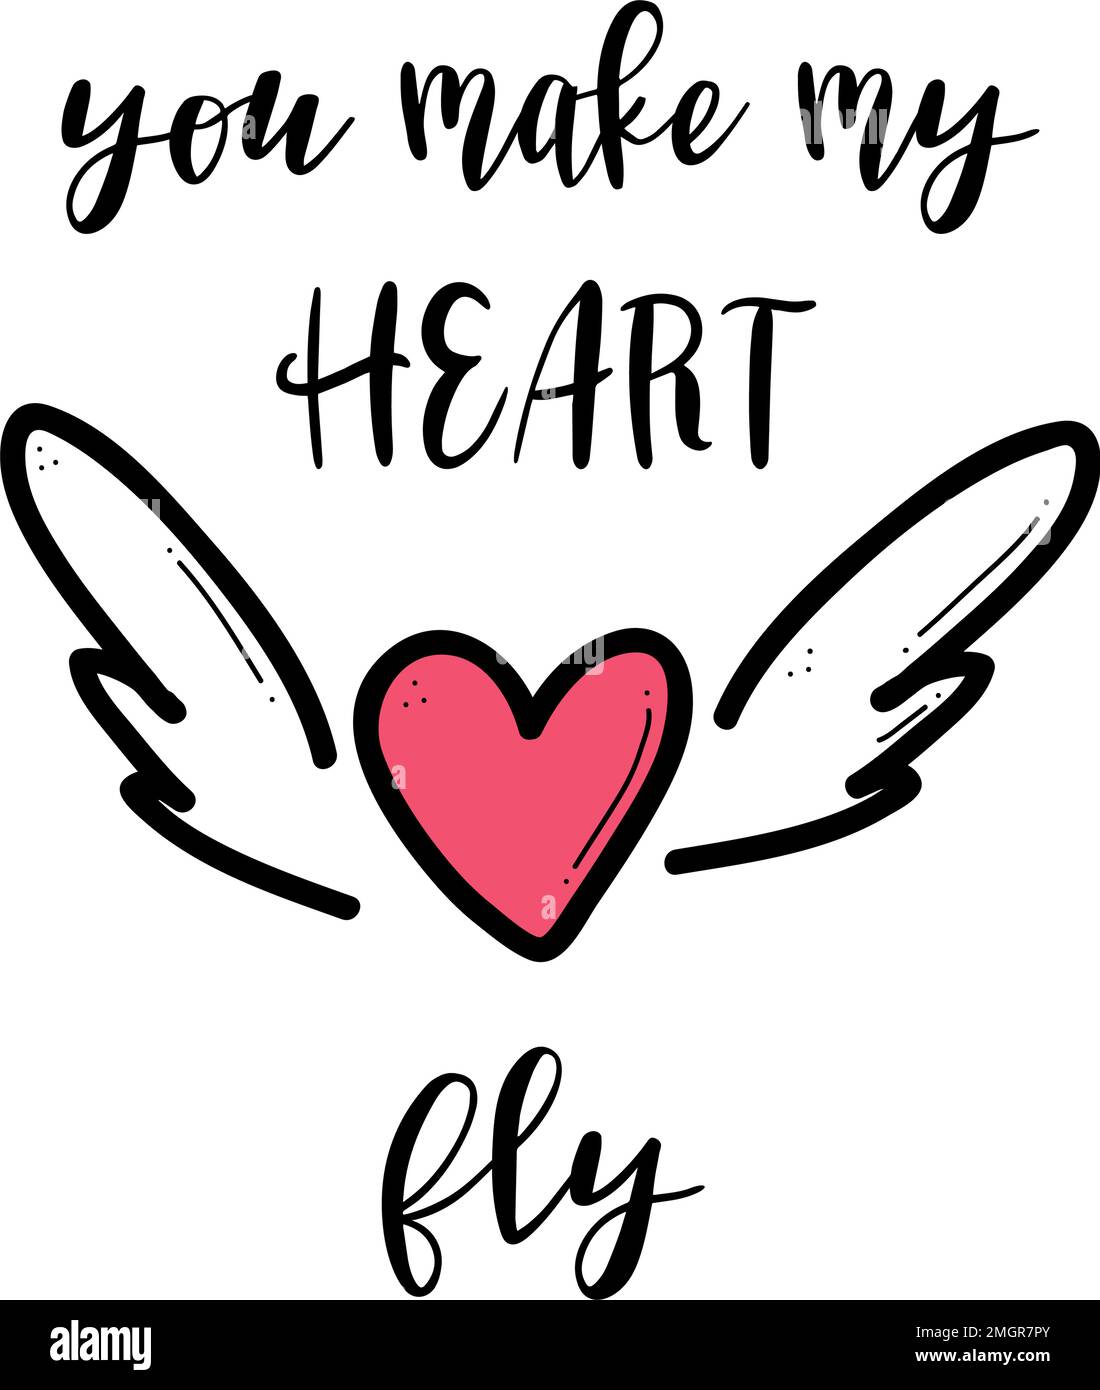 Cute Valentines banner, greeting card design vector illustration. You make my heart fly Stock Vector